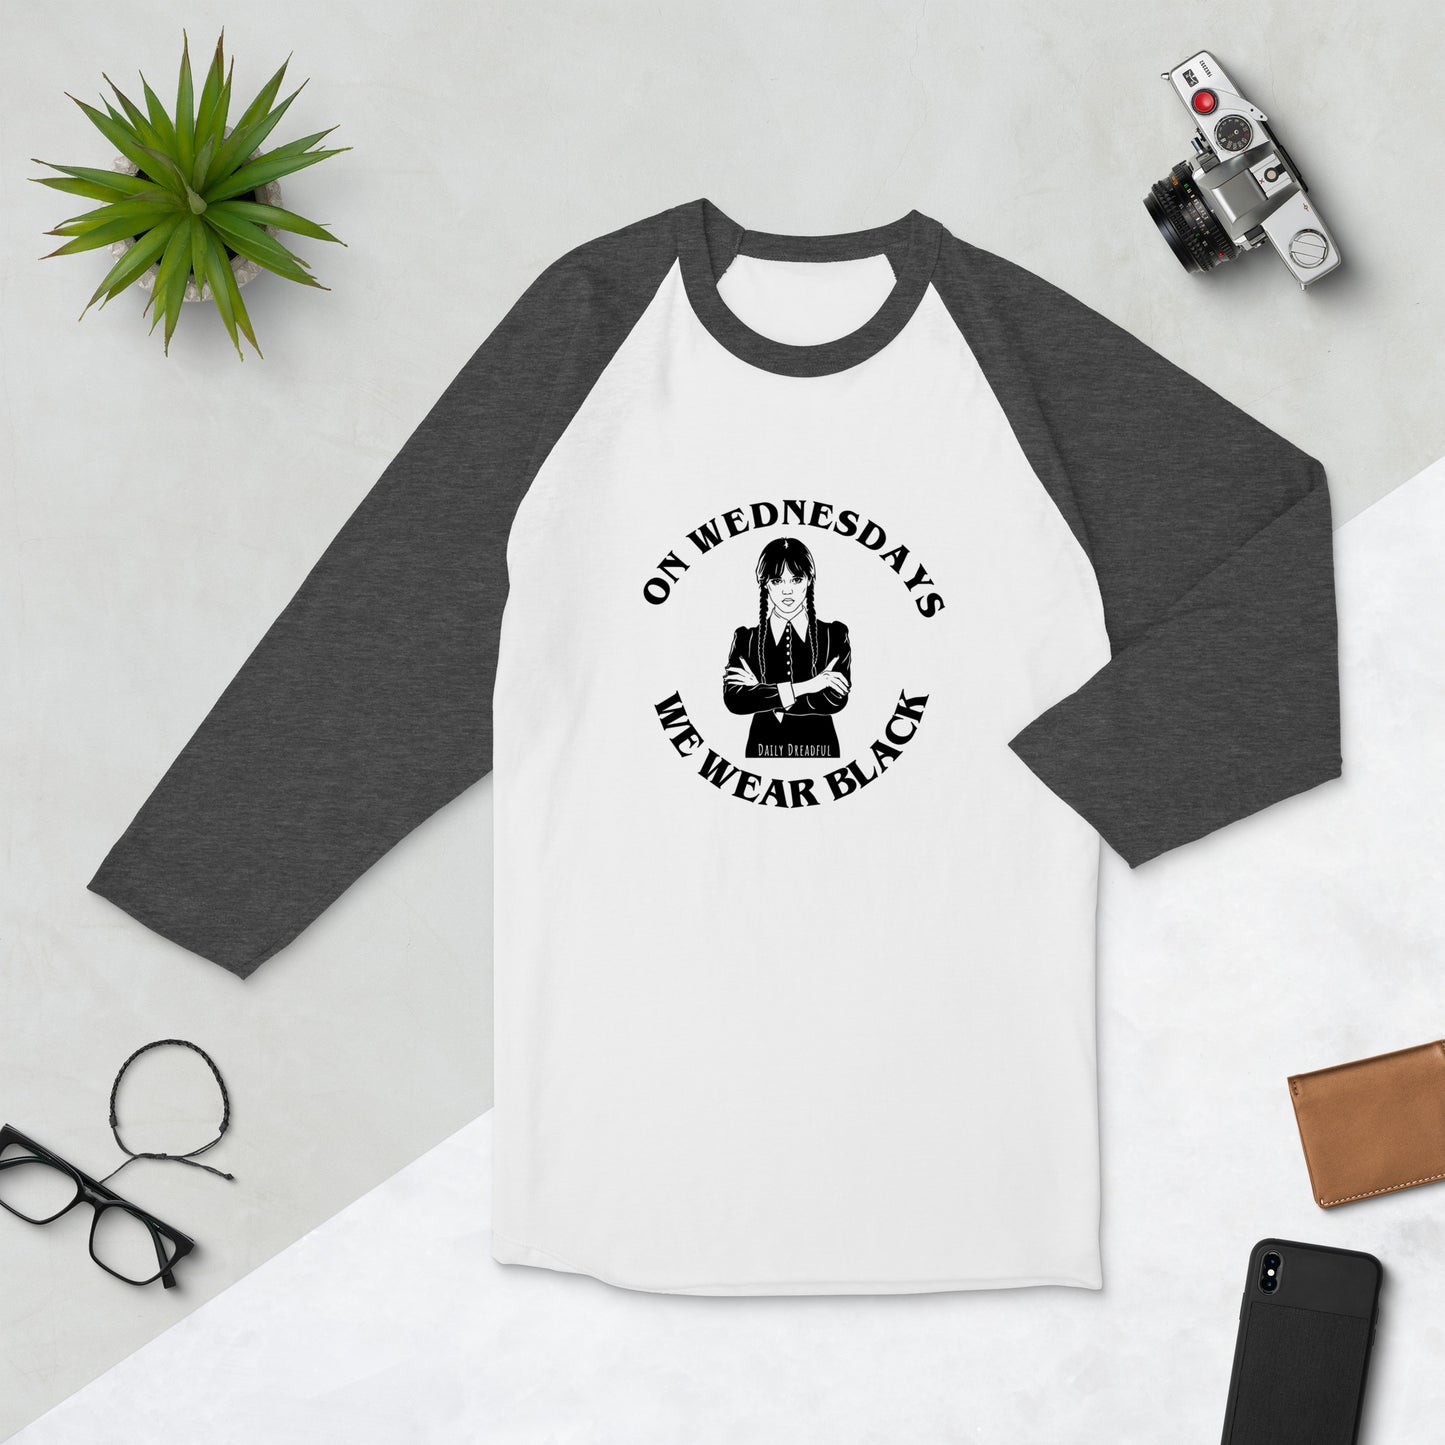 white & heather charcoal "On Wednesdays We Wear Black" 3/4 sleeve raglan shirt comes from Daily Dreadful